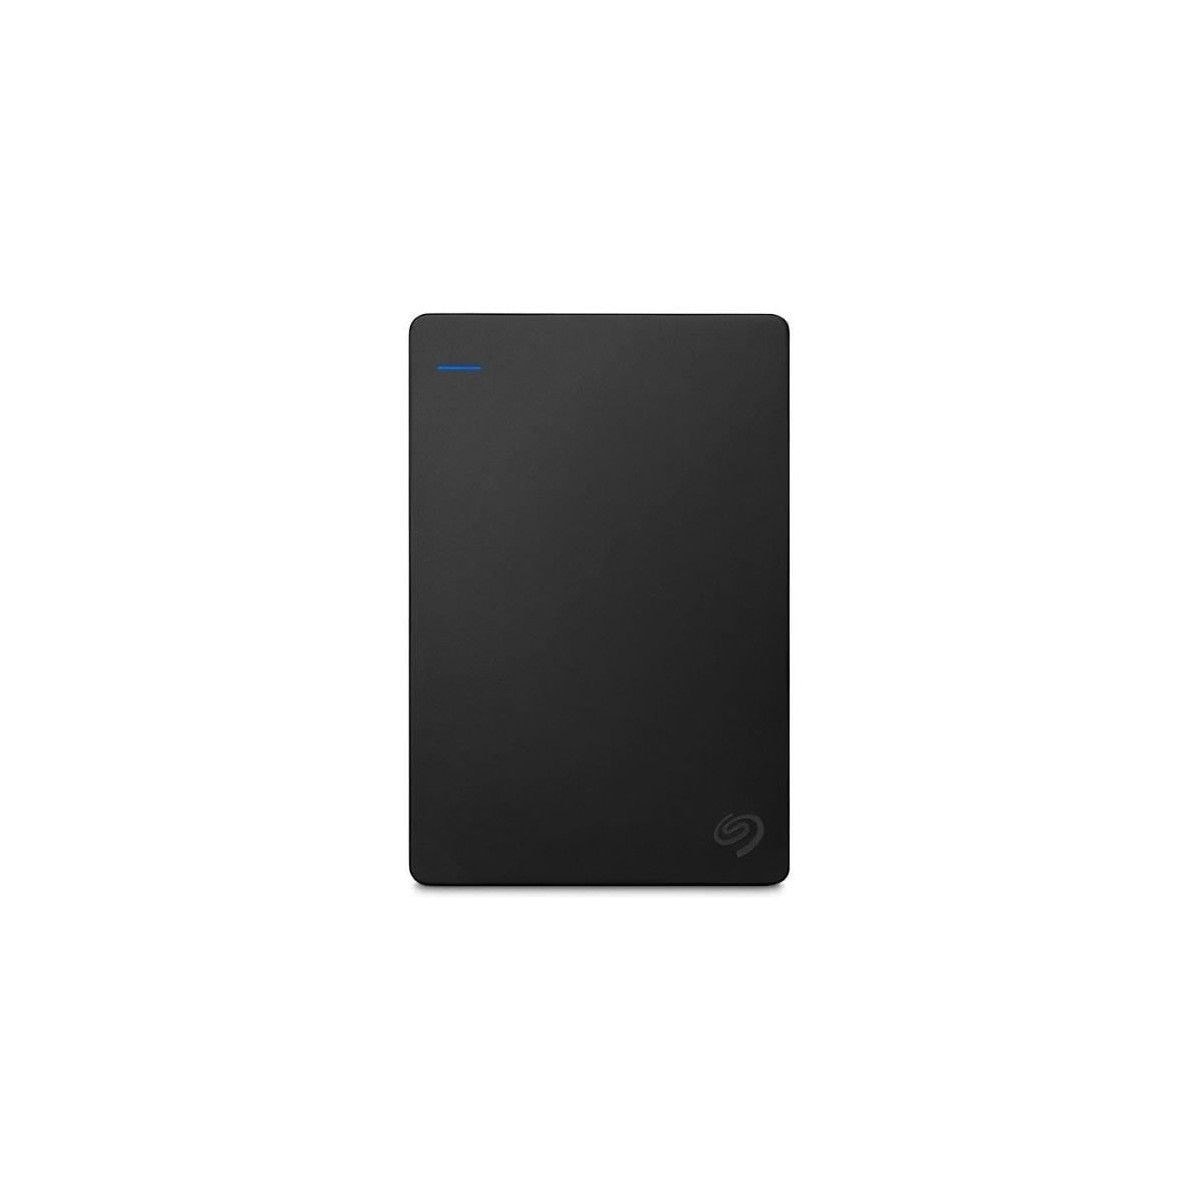 SEAGATE - Disque Dur Externe Gaming Playstation PS4 - 2To - USB